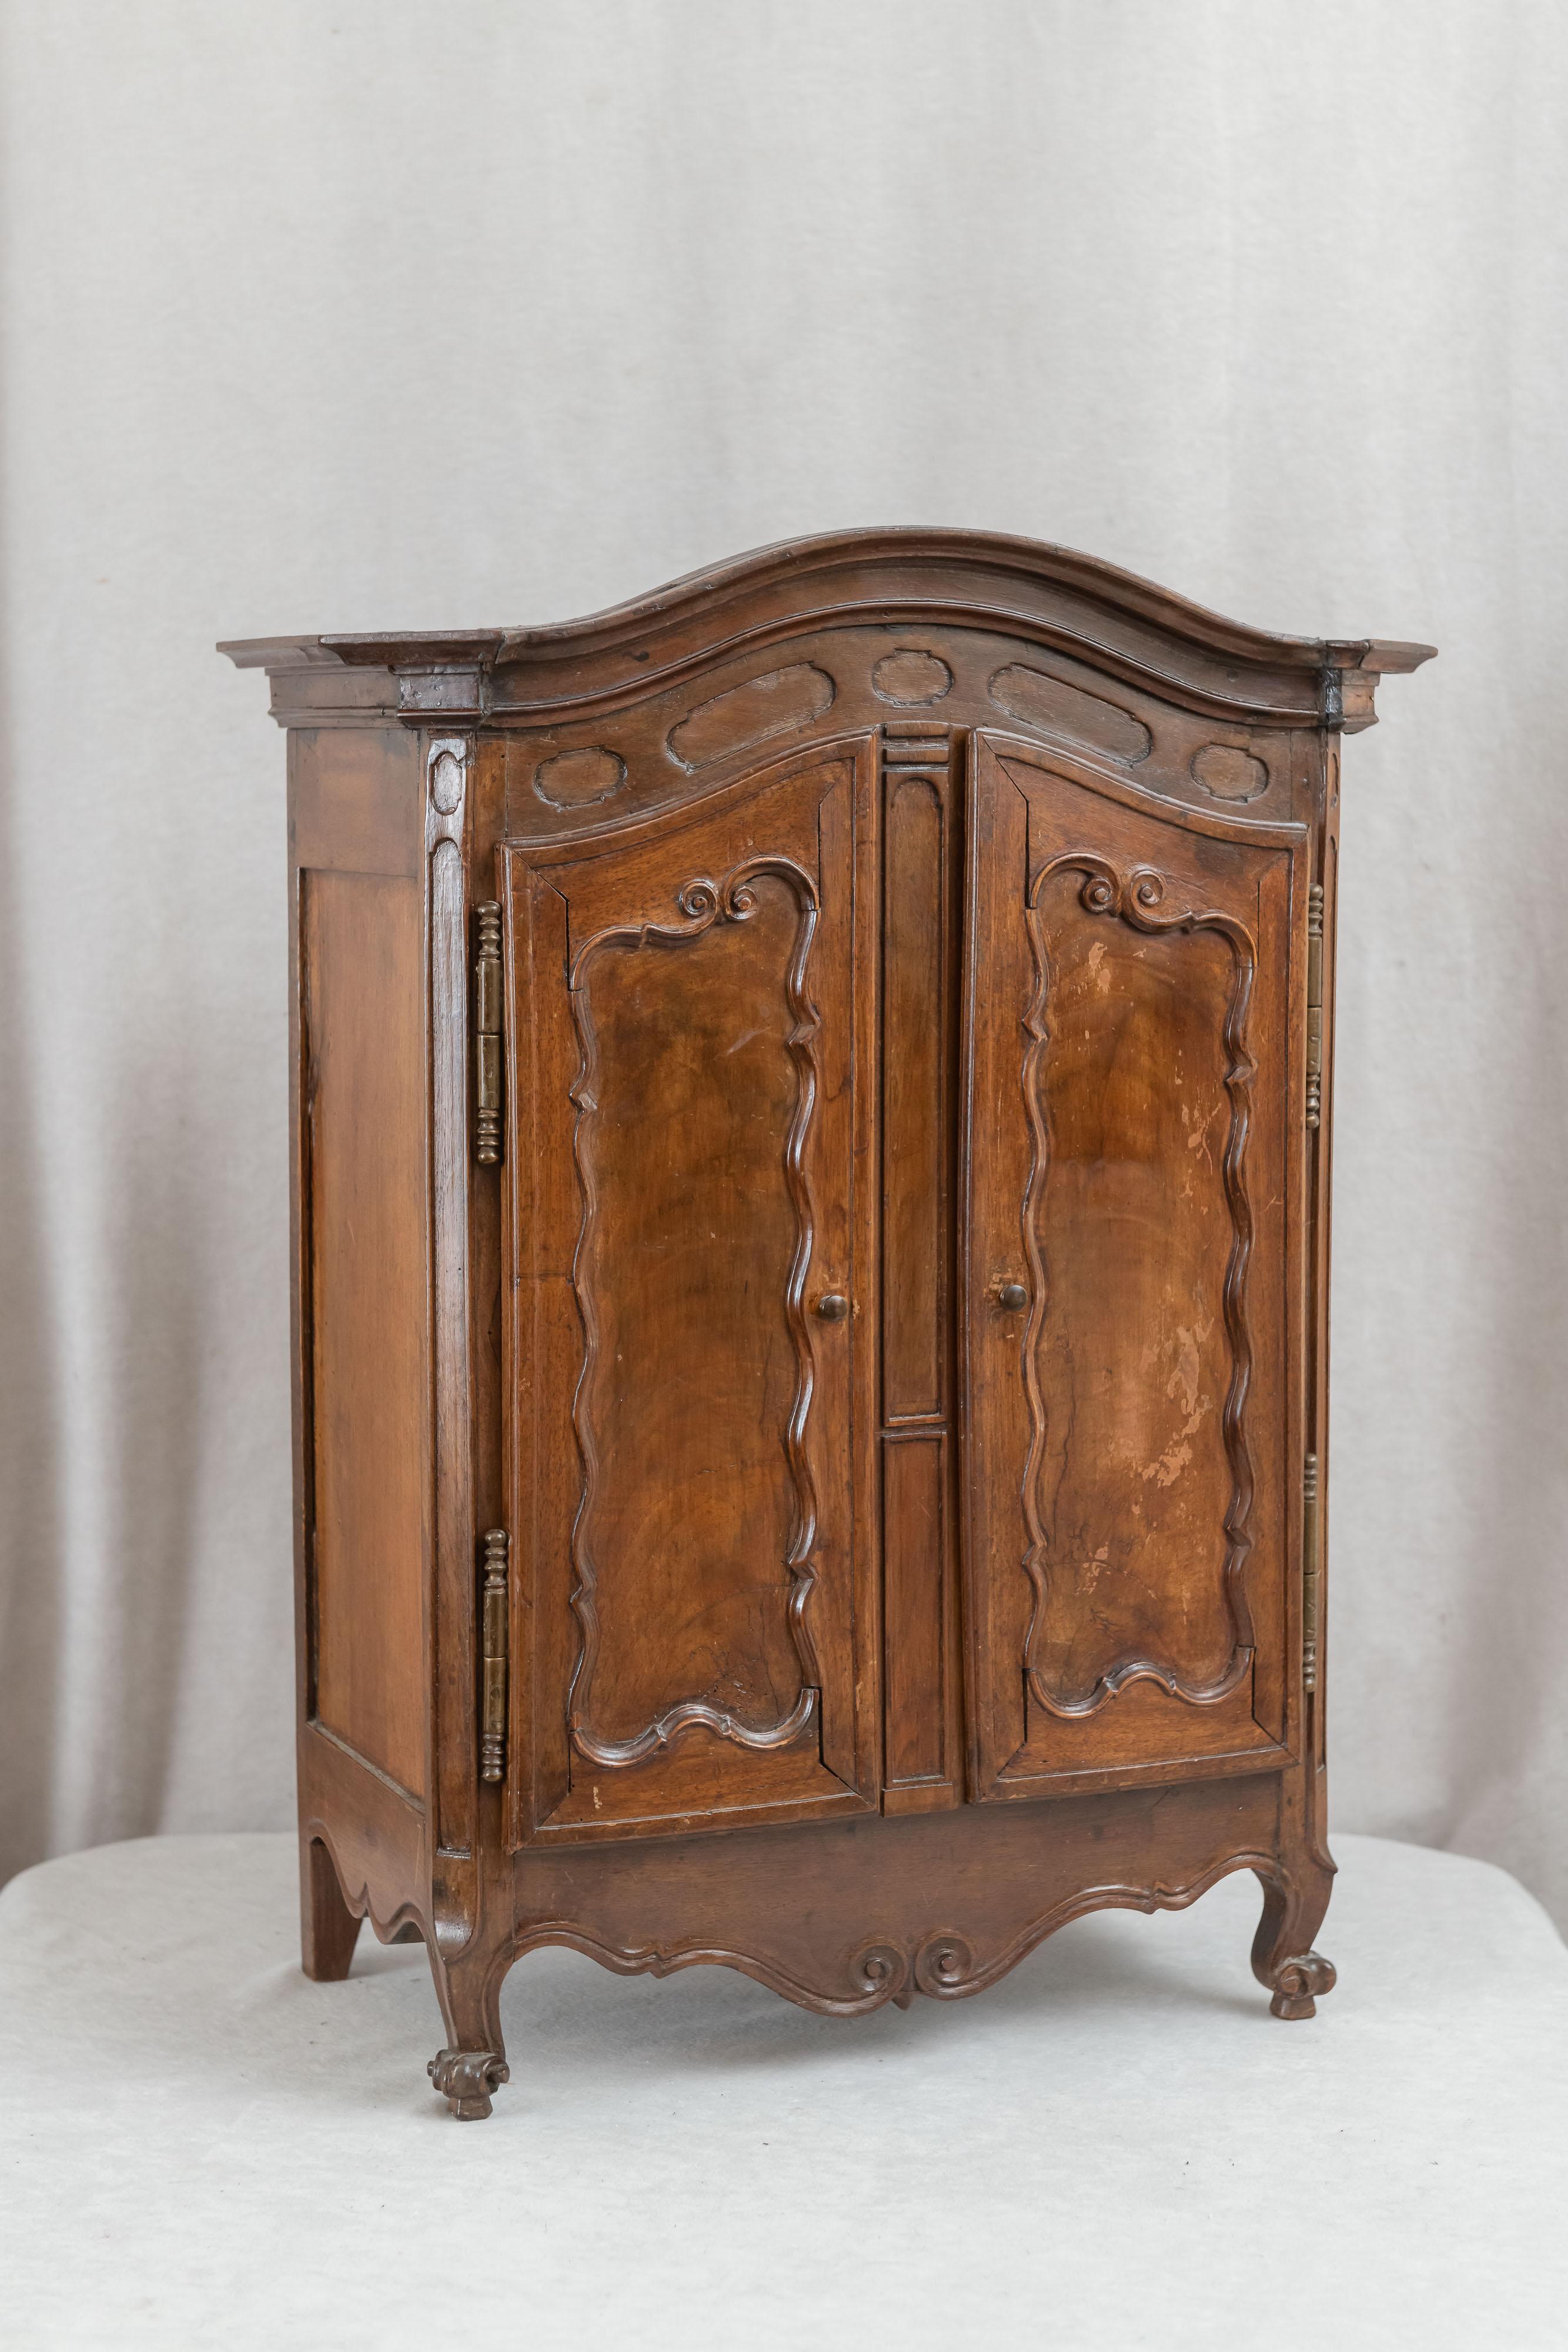 This most remarkable miniature walnut armoire has survived well over 100 years, and is still intact. We cannot say for sure whether it was a salesman's sample or just a miniature, but since it pays such close attention to all the necessary